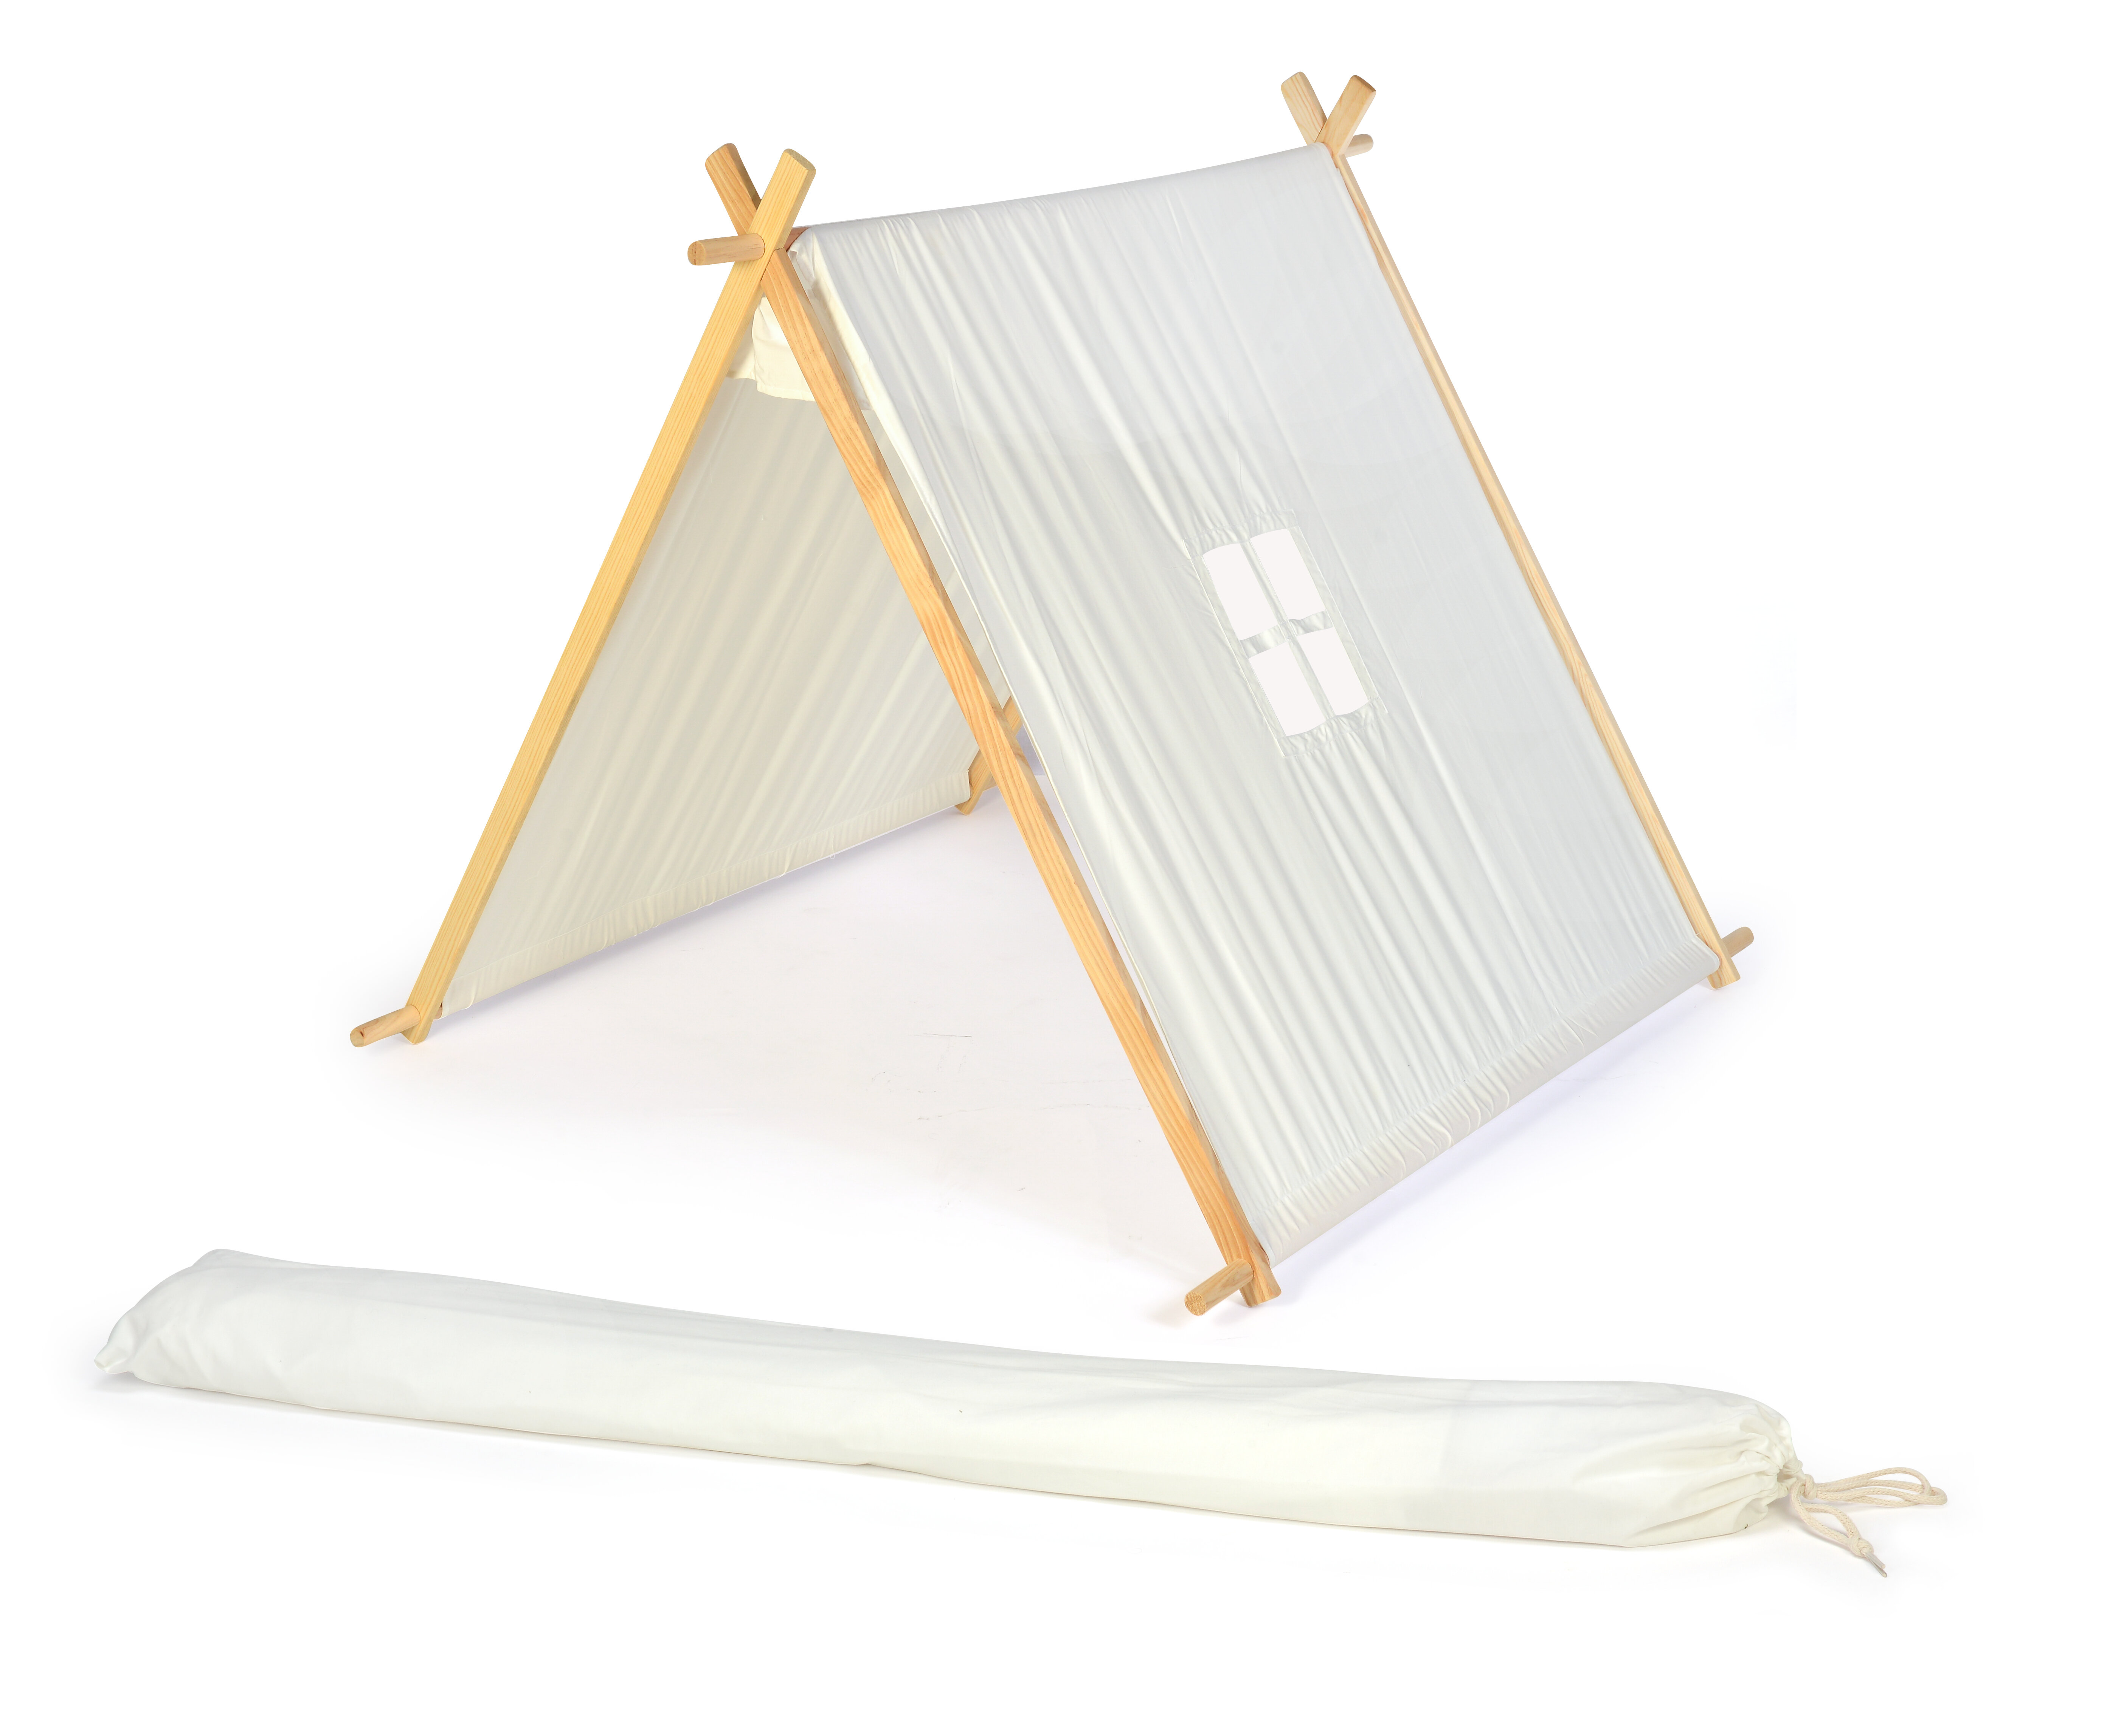 OUTREE Kids Teepee Tent Kids Play Tent for boys & girls indoor/outdoor with 5 Wooden Poles & Carry Bag White Canvas 